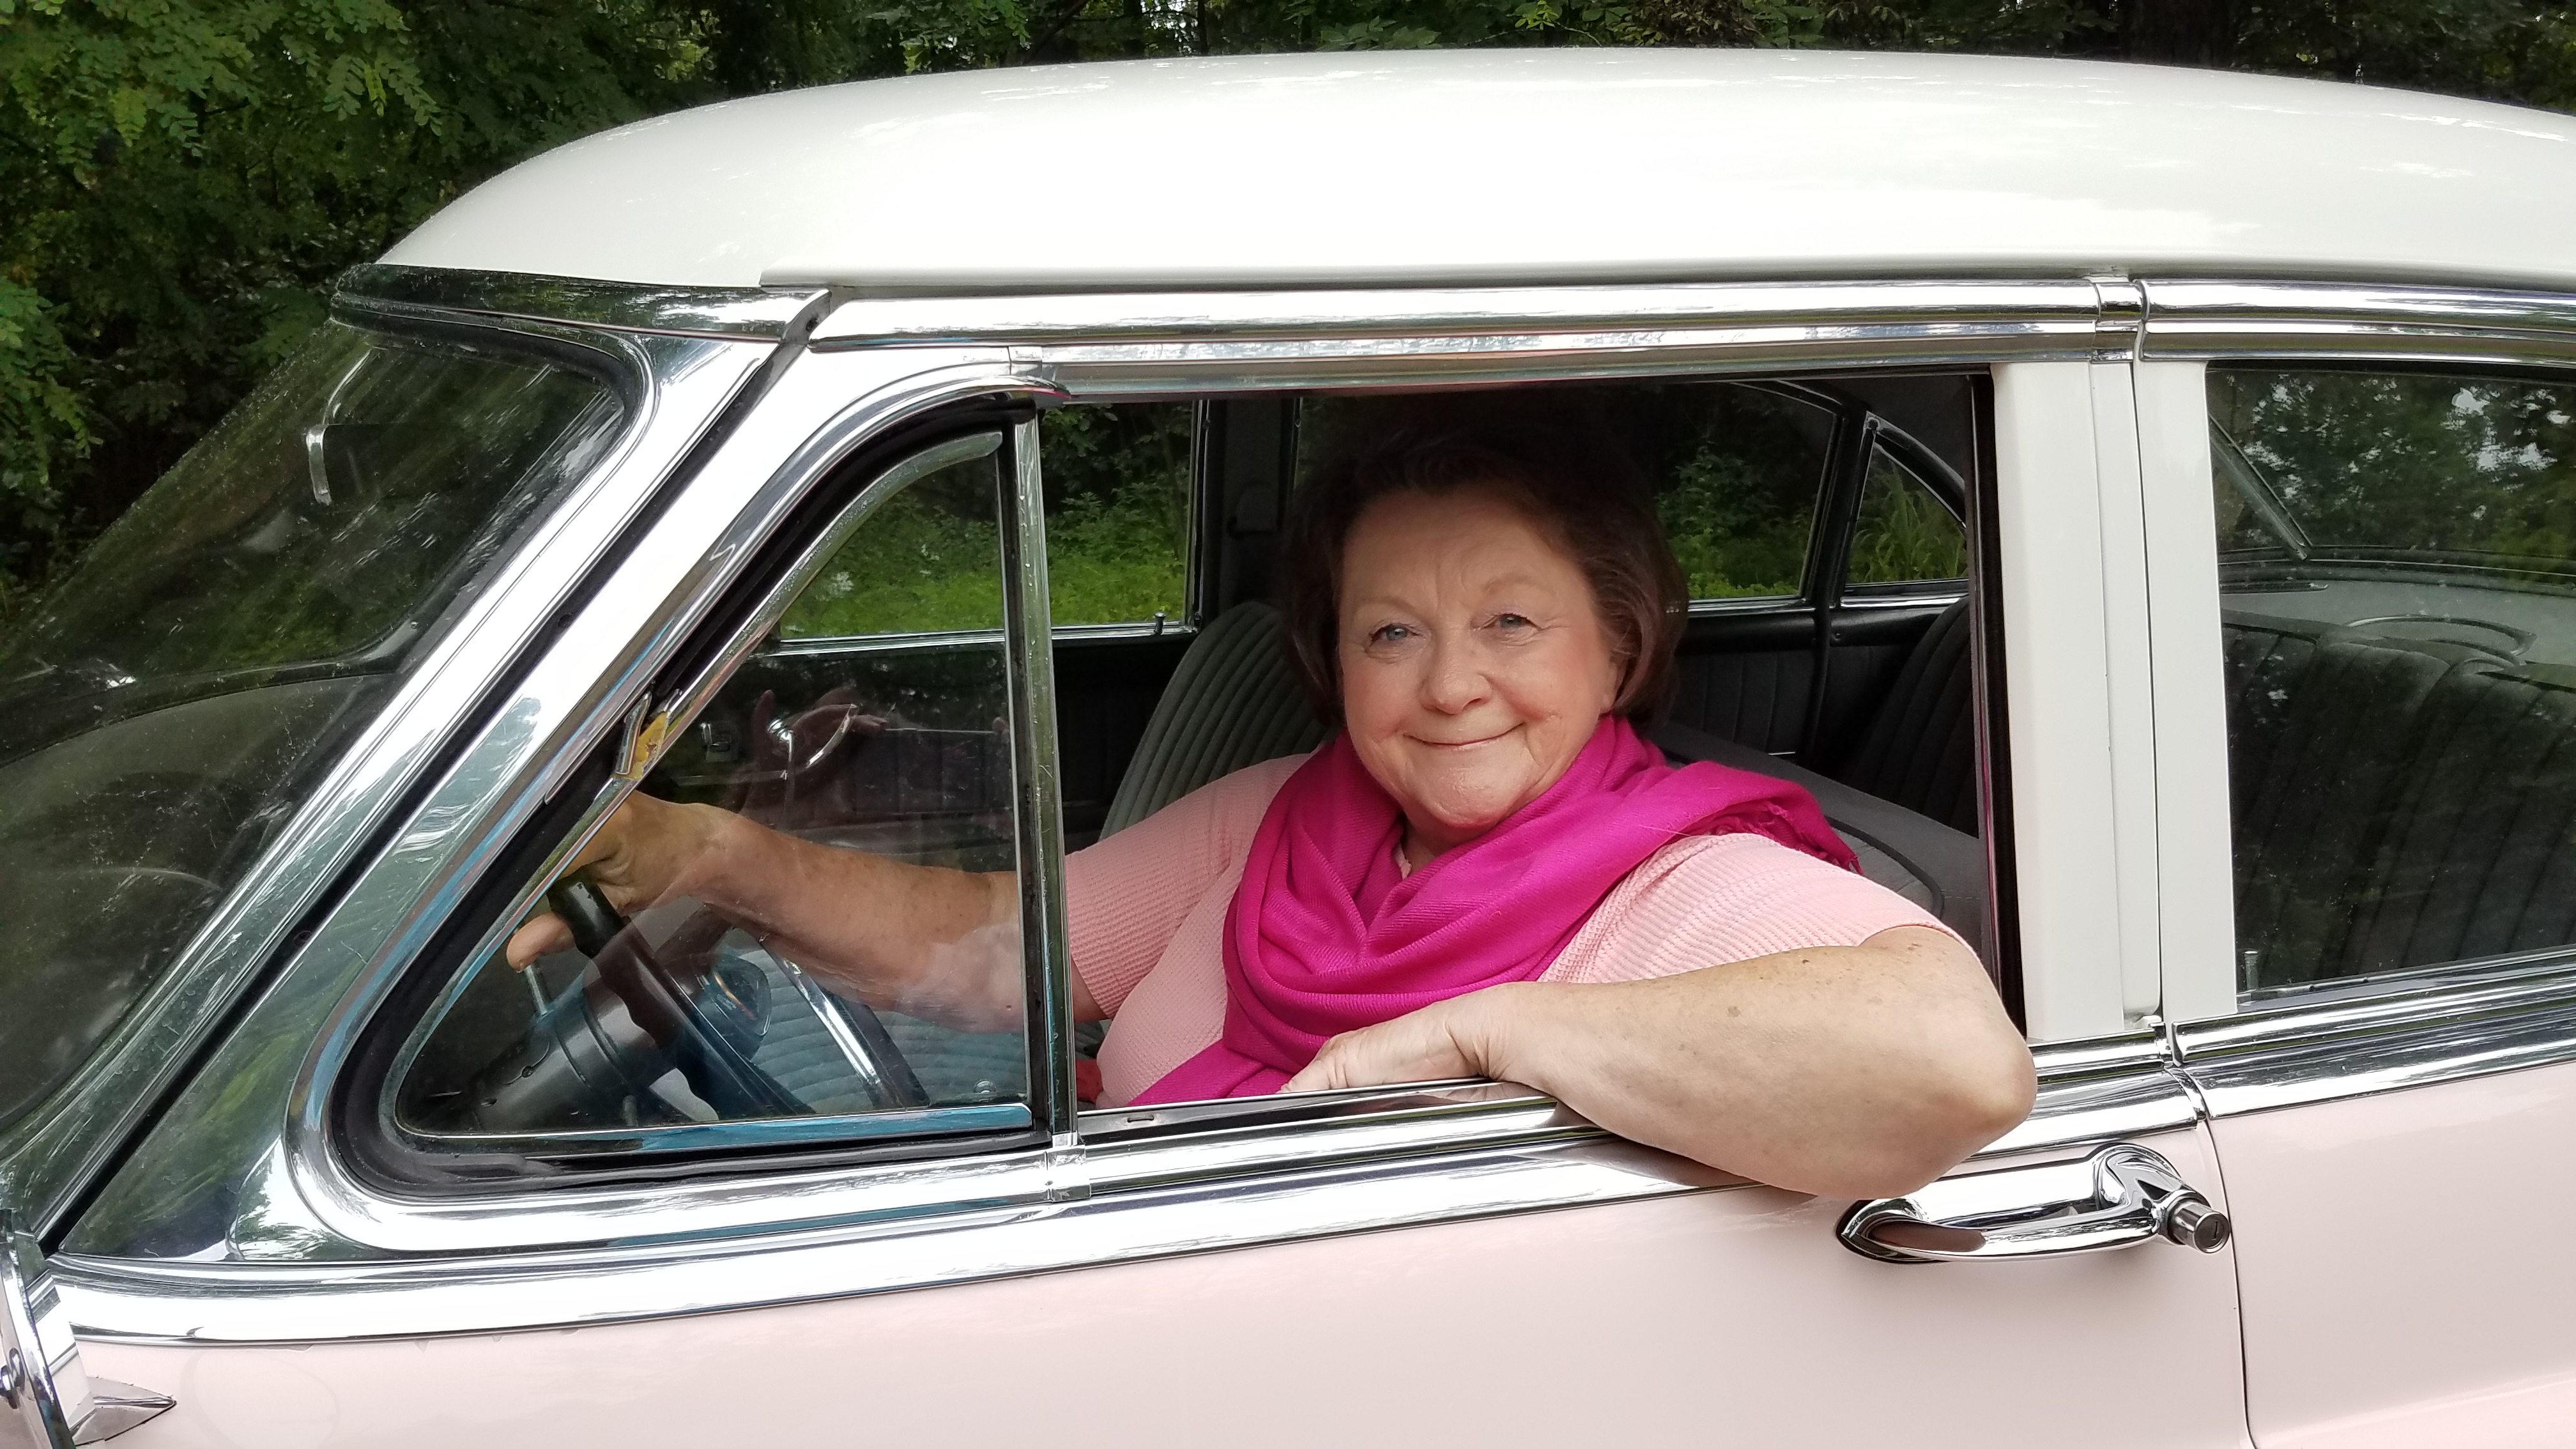 Lady in pink Cadillac